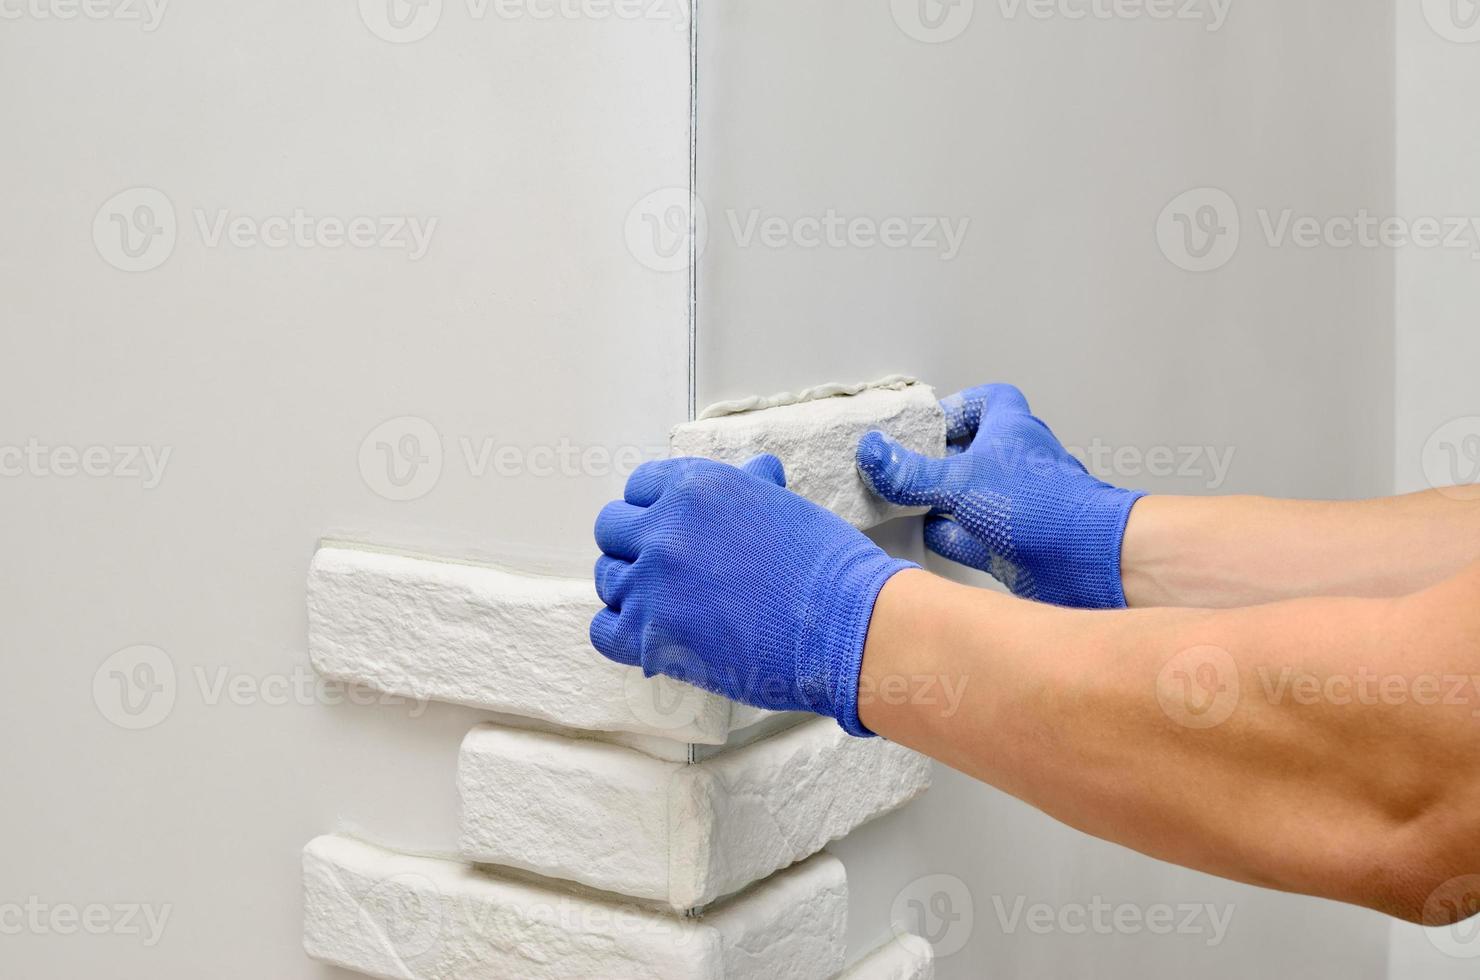 Facing wall decorative tiles, workers in blue glove photo